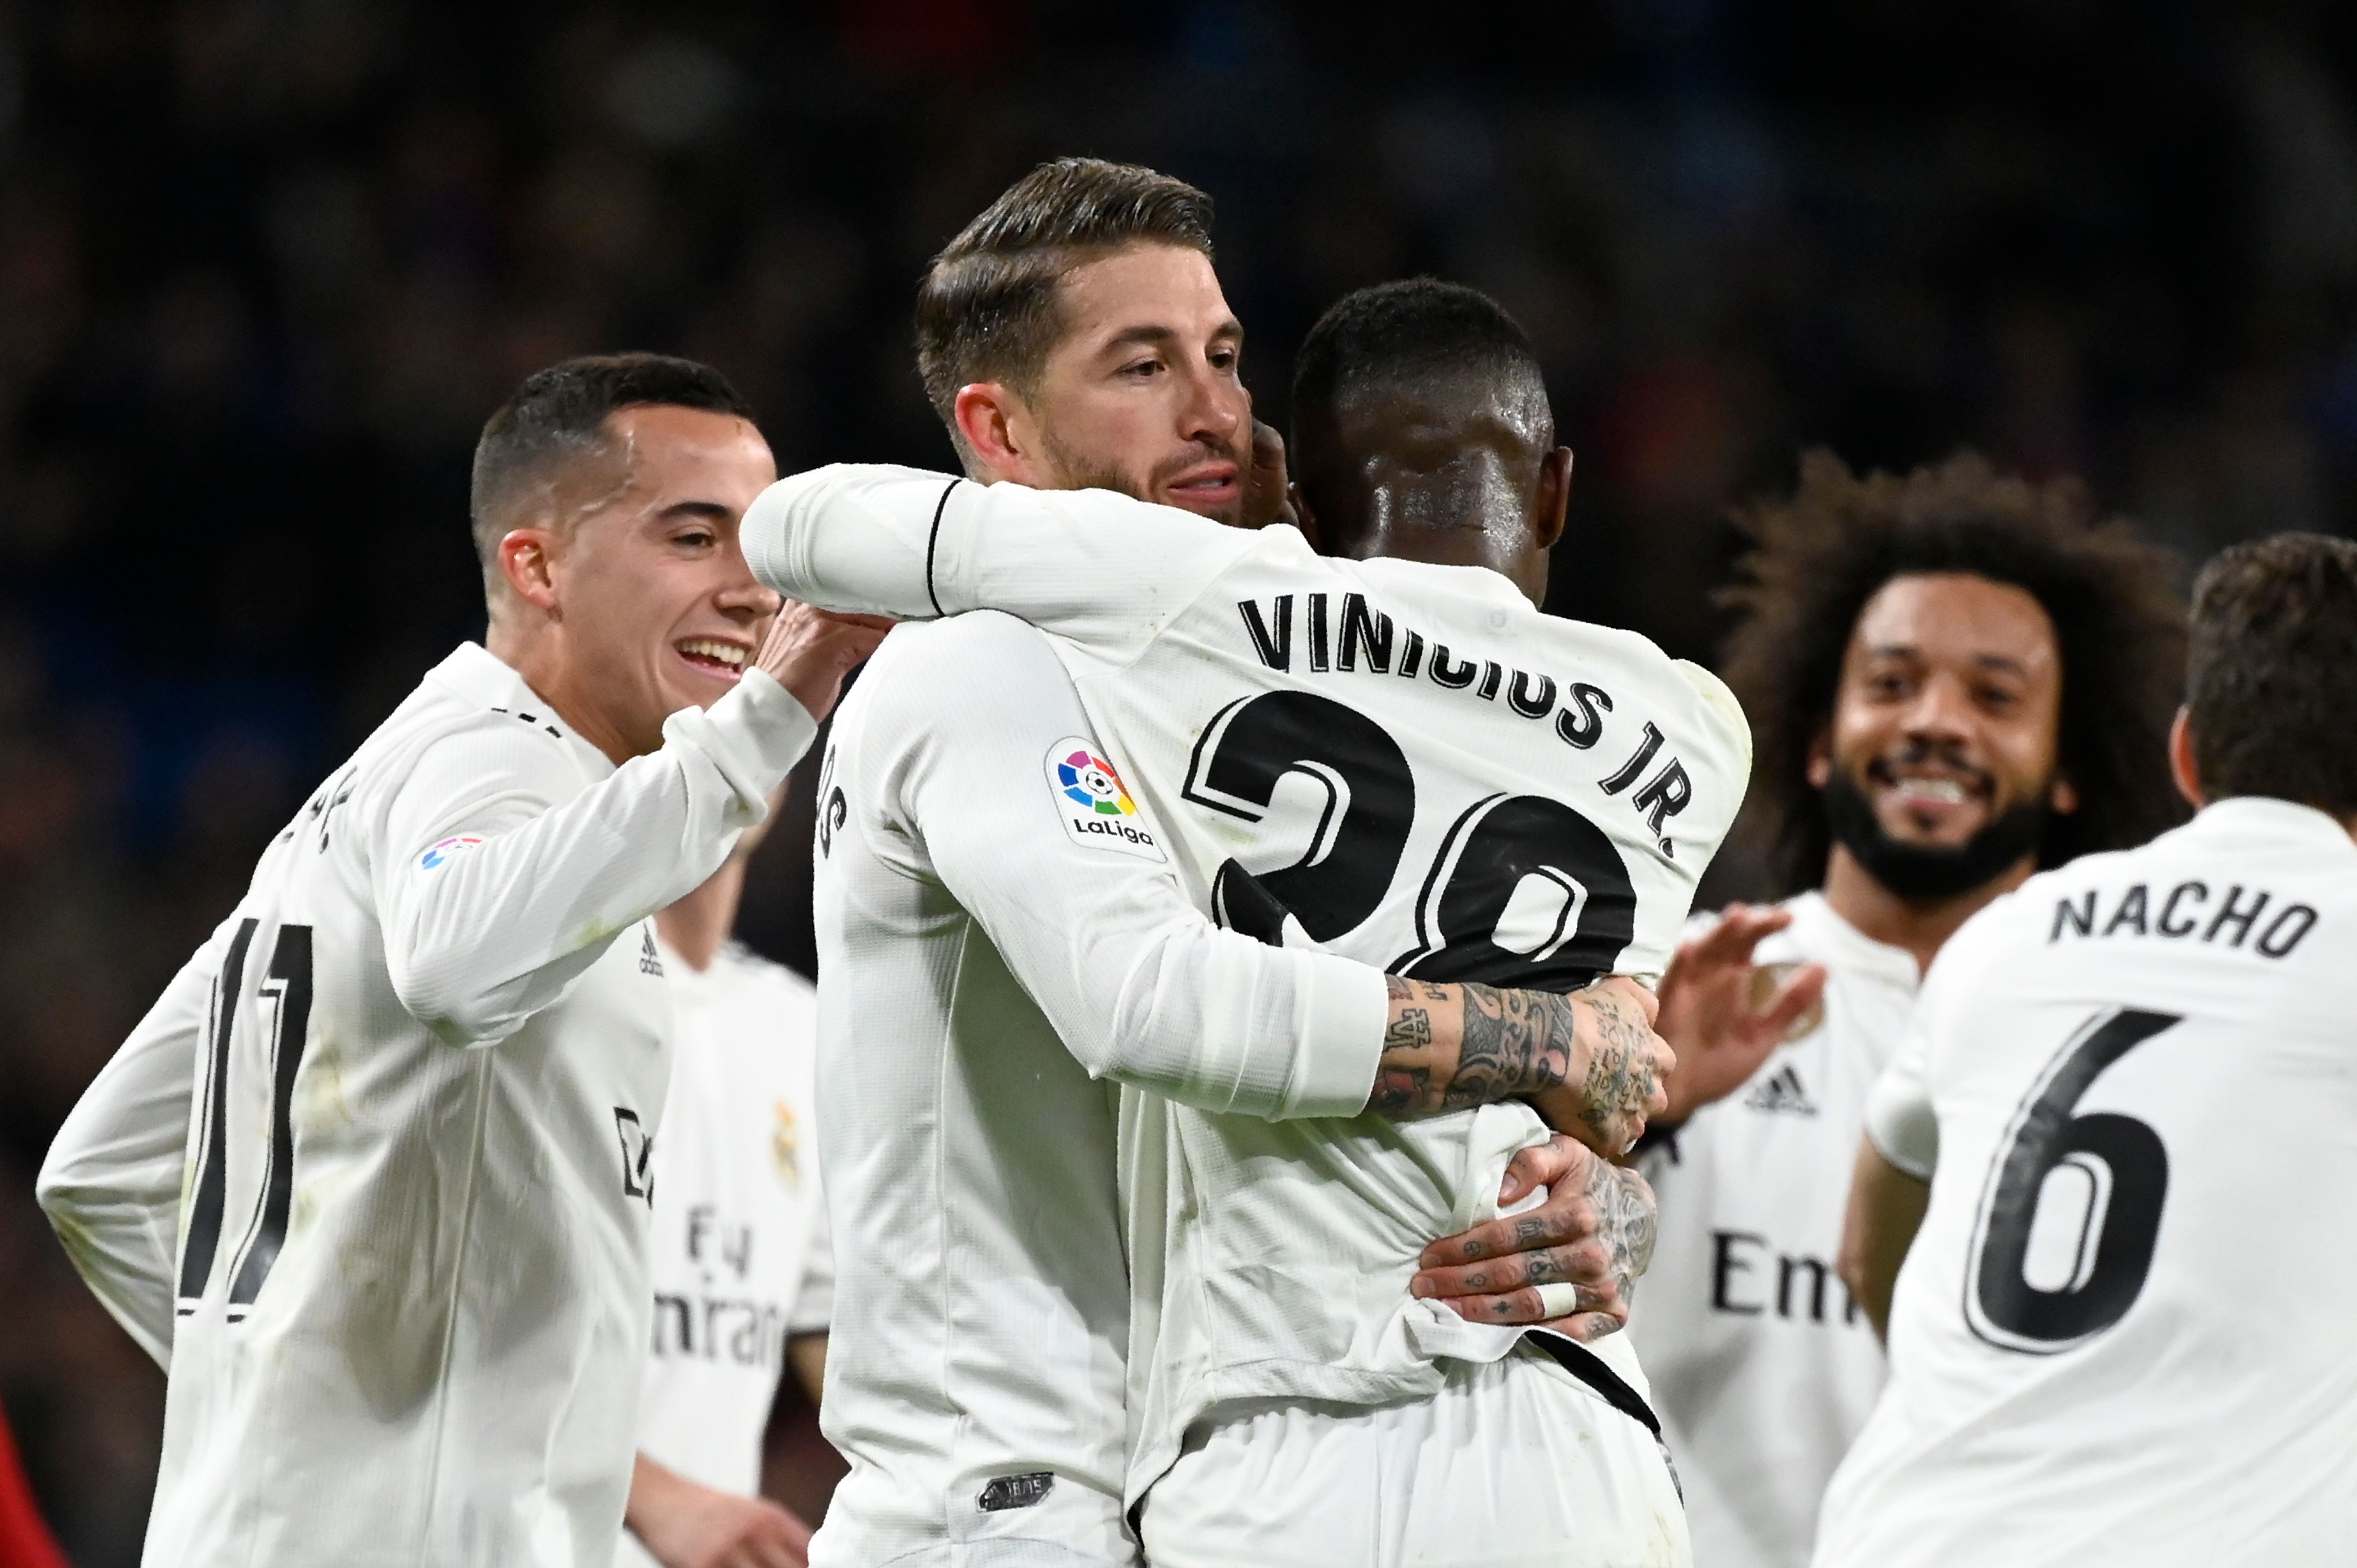 Real Madrid's Spanish defender Sergio Ramos (C) celebrates with teammates after scoring a penalty during the Spanish Copa del Rey (King's Cup) quarter-final first leg football match between Real Madrid CF and Girona FC at the Santiago Bernabeu stadium in Madrid on January 24, 2019. (Photo by JAVIER SORIANO / AFP)        (Photo credit should read JAVIER SORIANO/AFP/Getty Images)